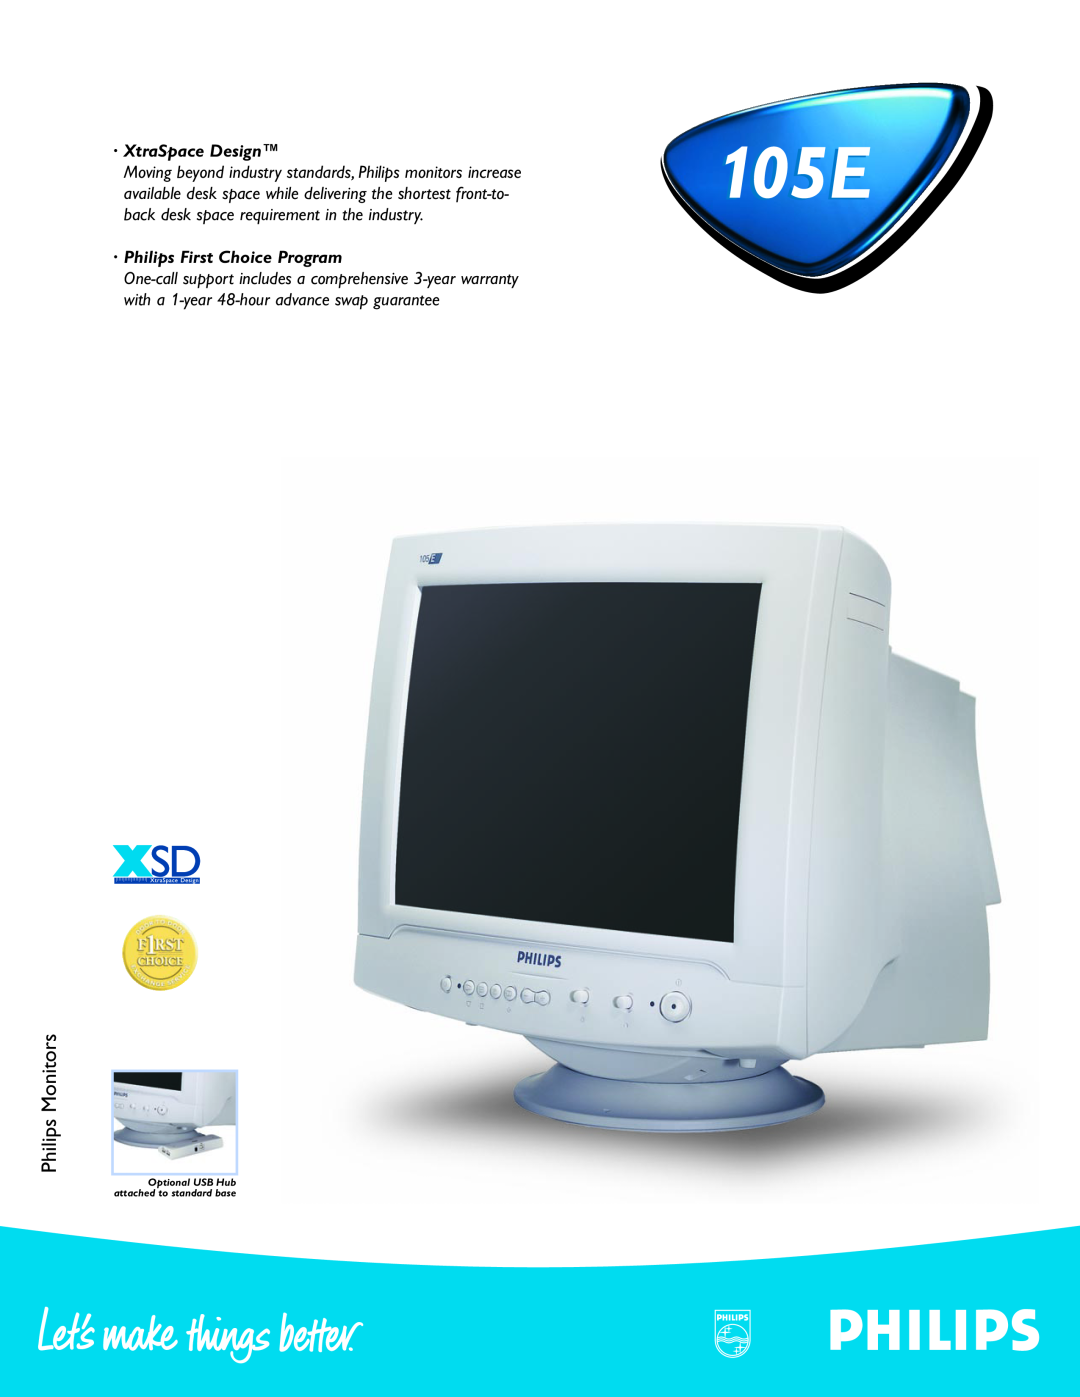 Philips 105E105E warranty Philips Monitors, · XtraSpace Design, back desk space requirement in the industry 